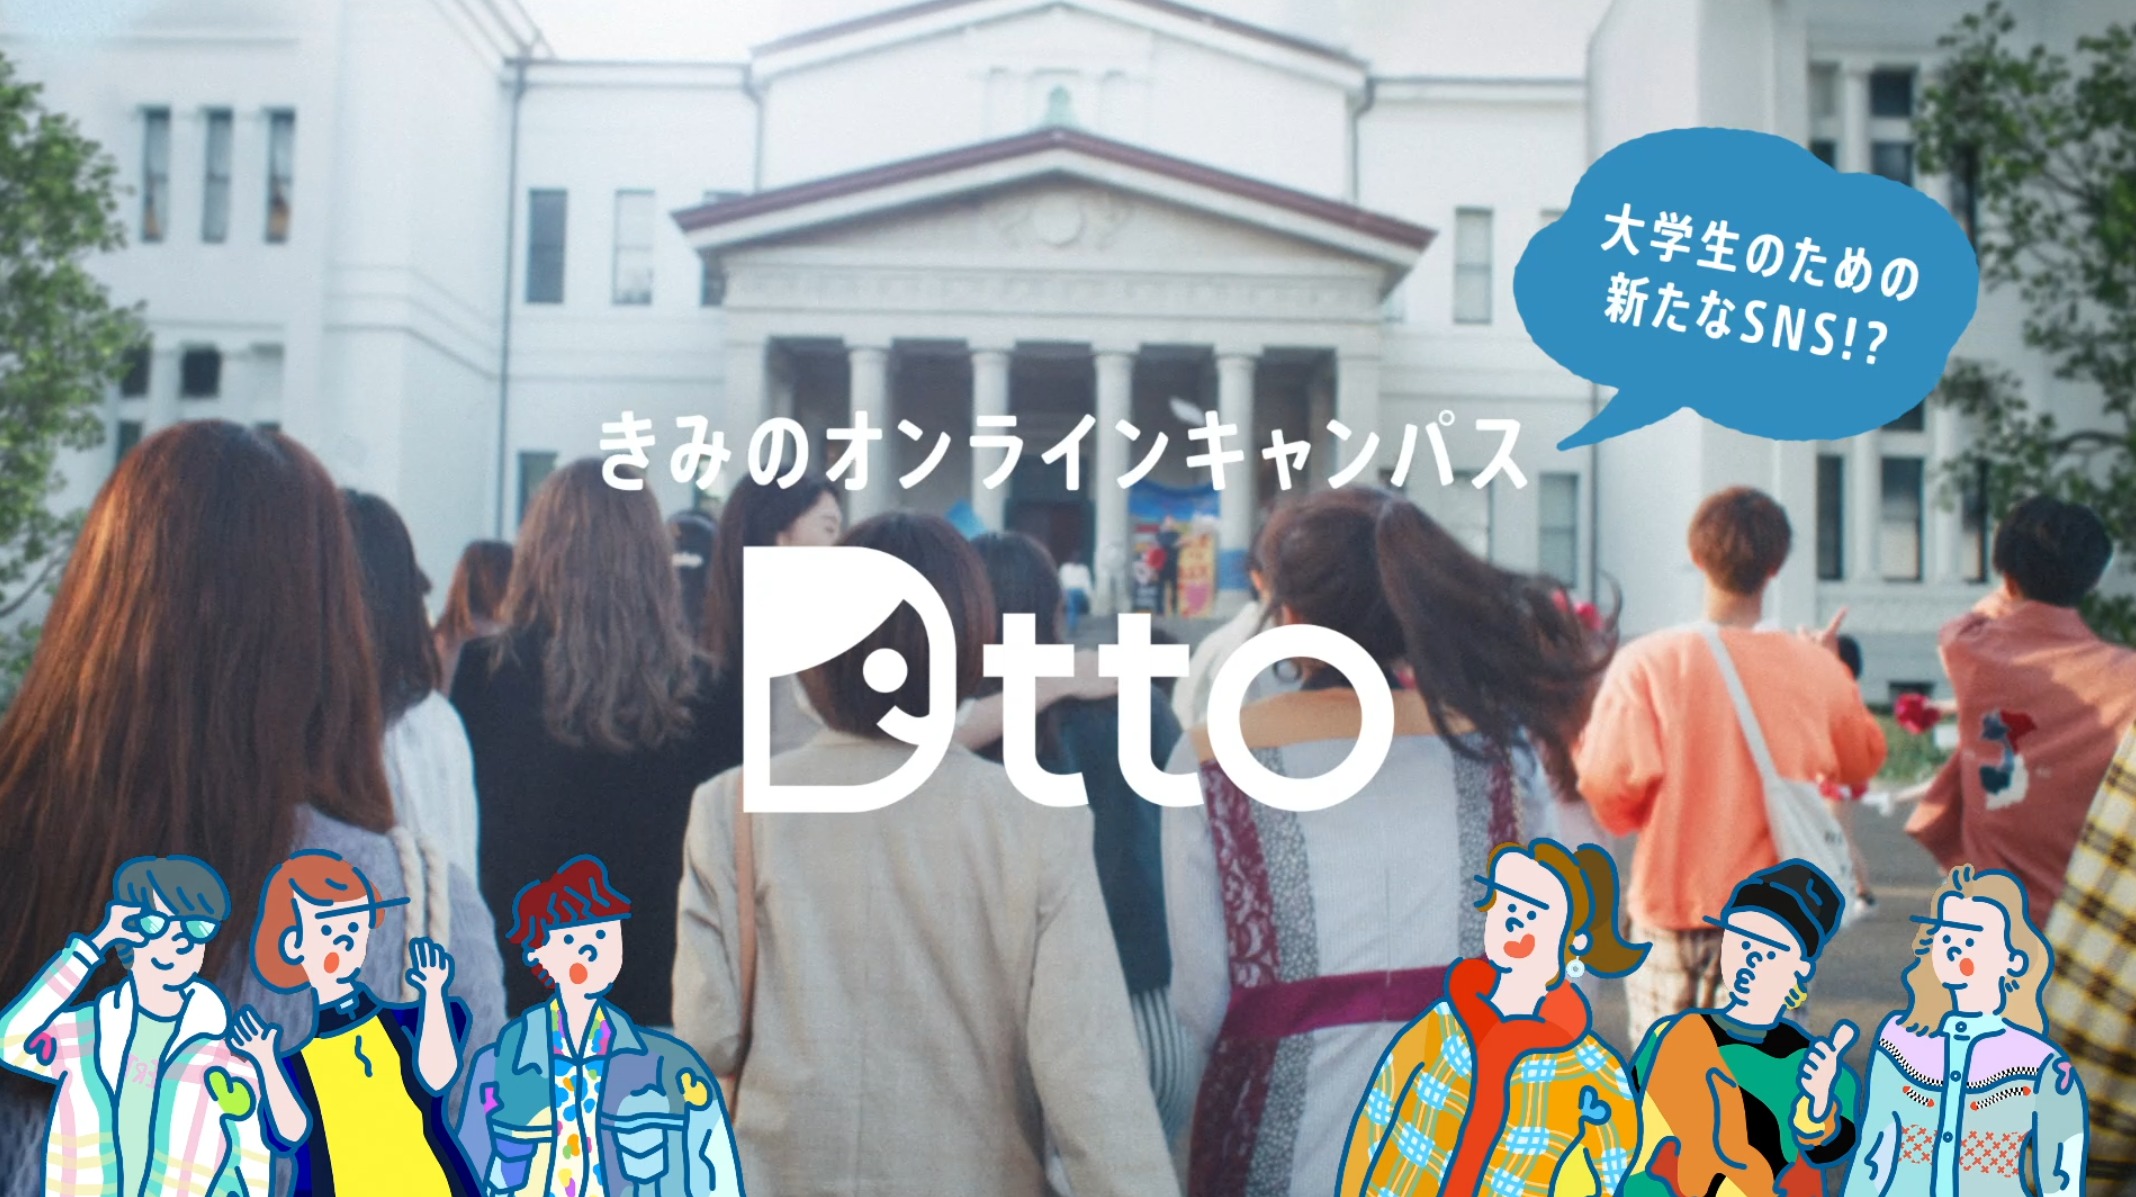 Dtto / ディット WEBムービー（編集／スタイリスト）